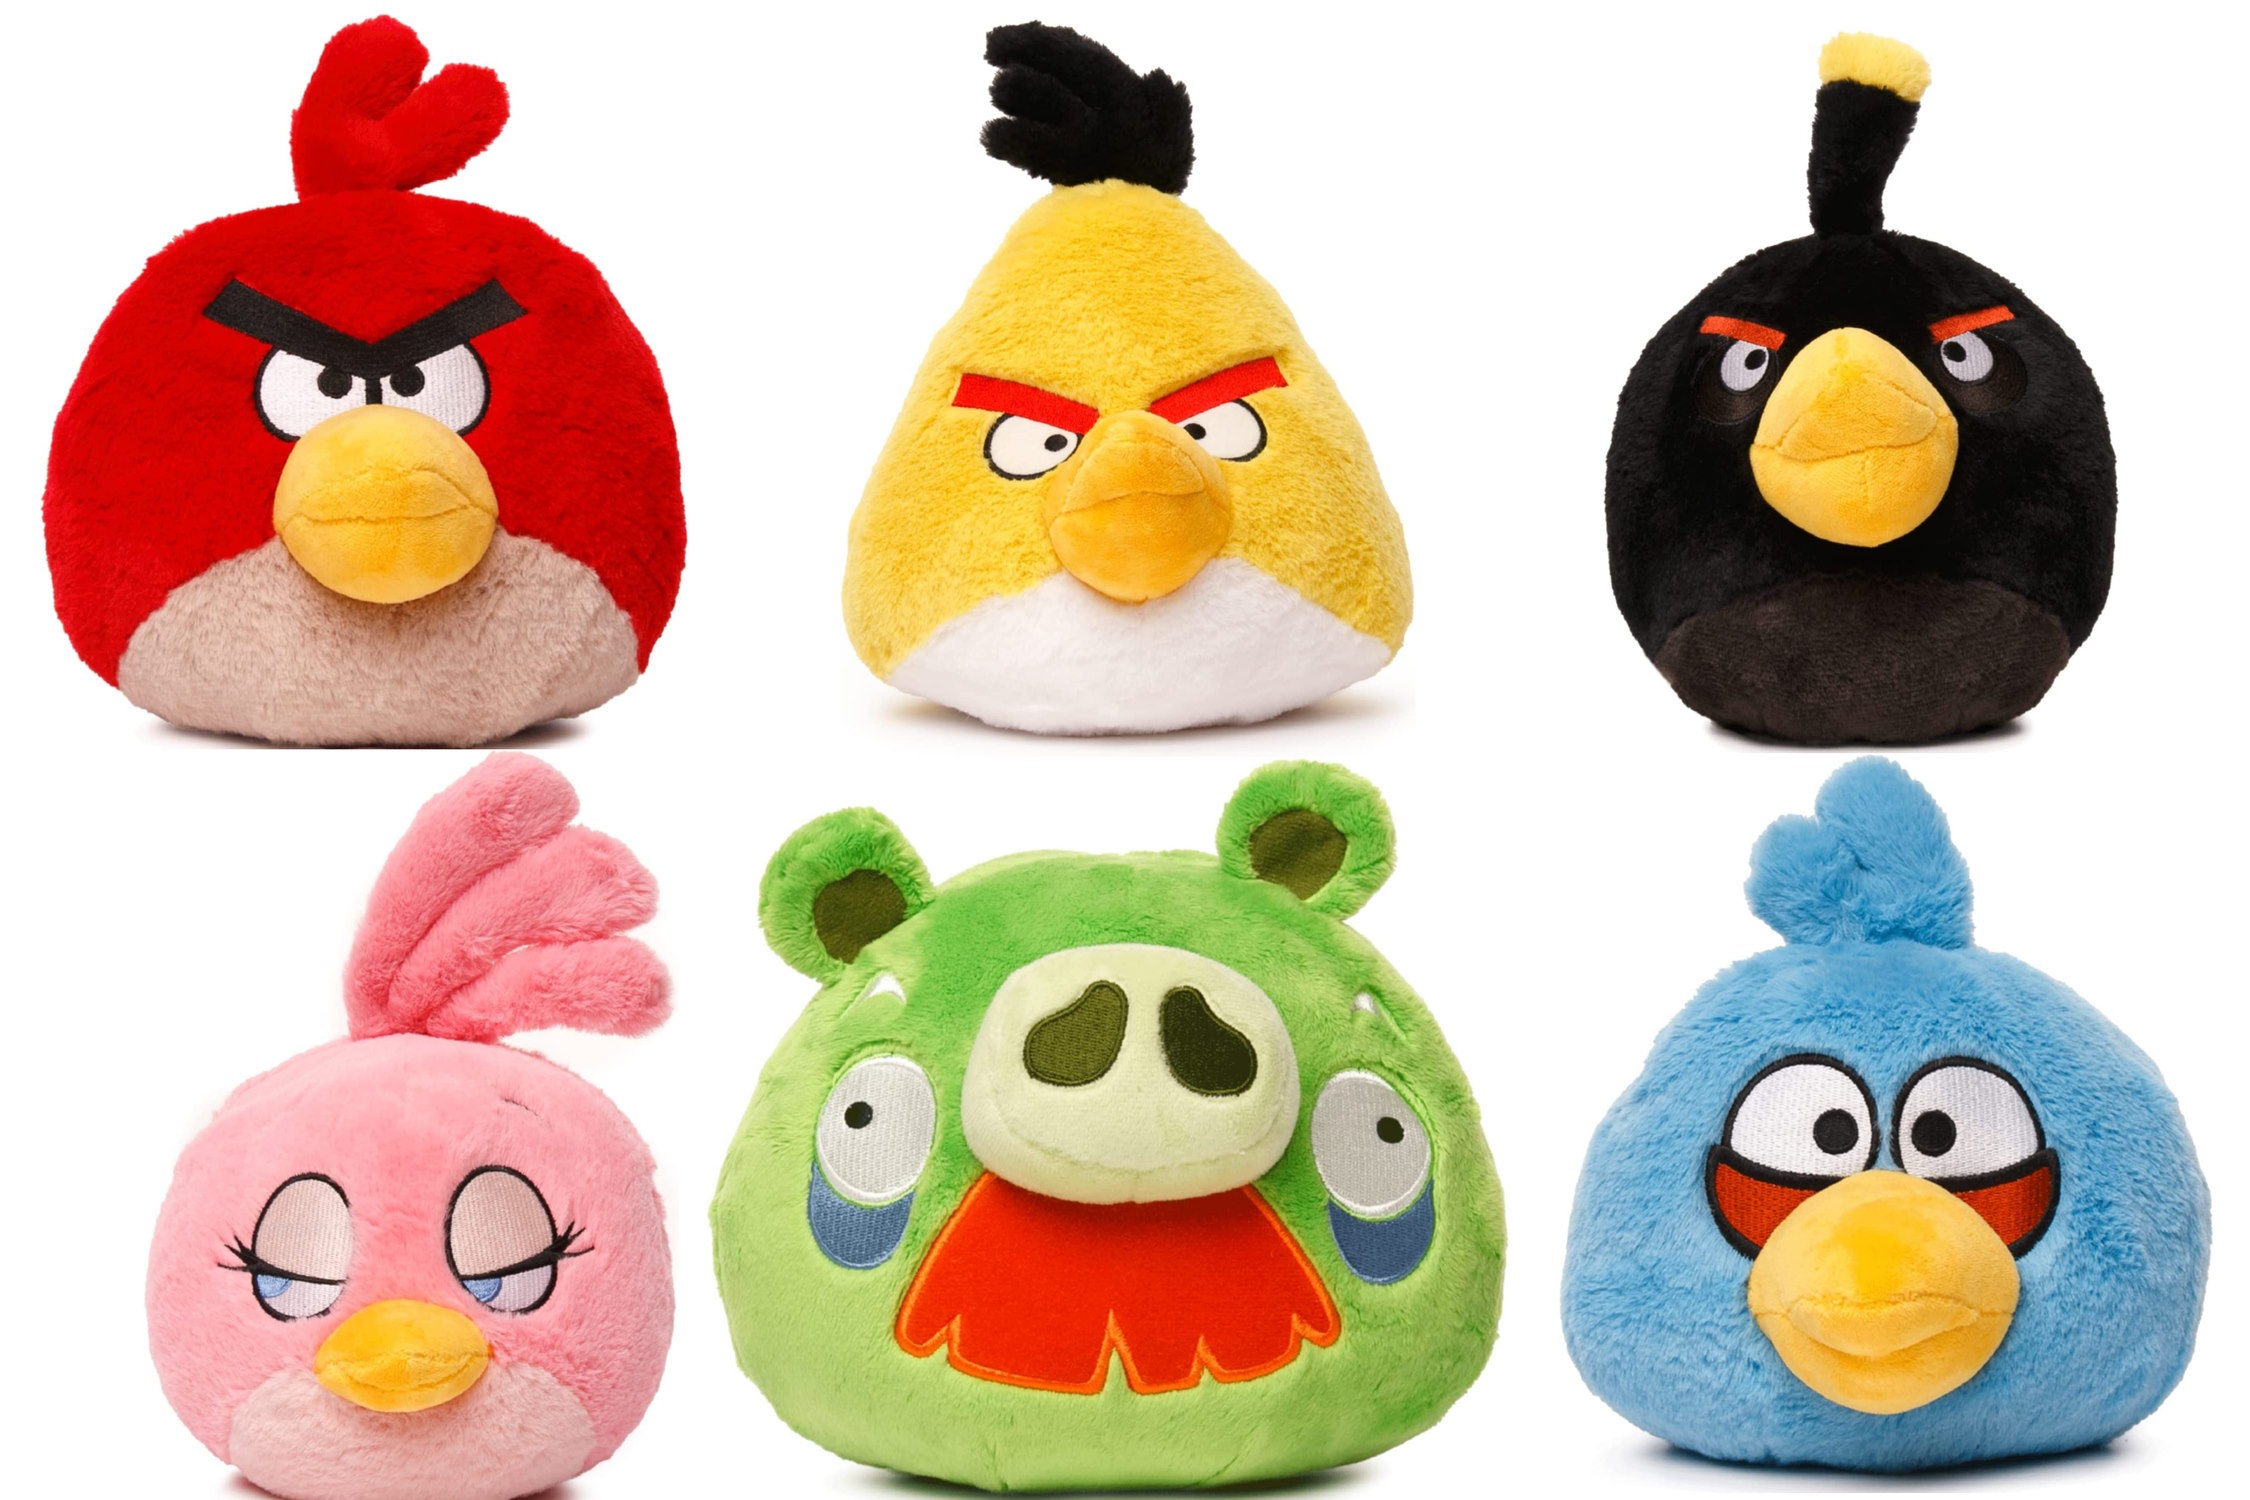 Peluche di Angry Birds